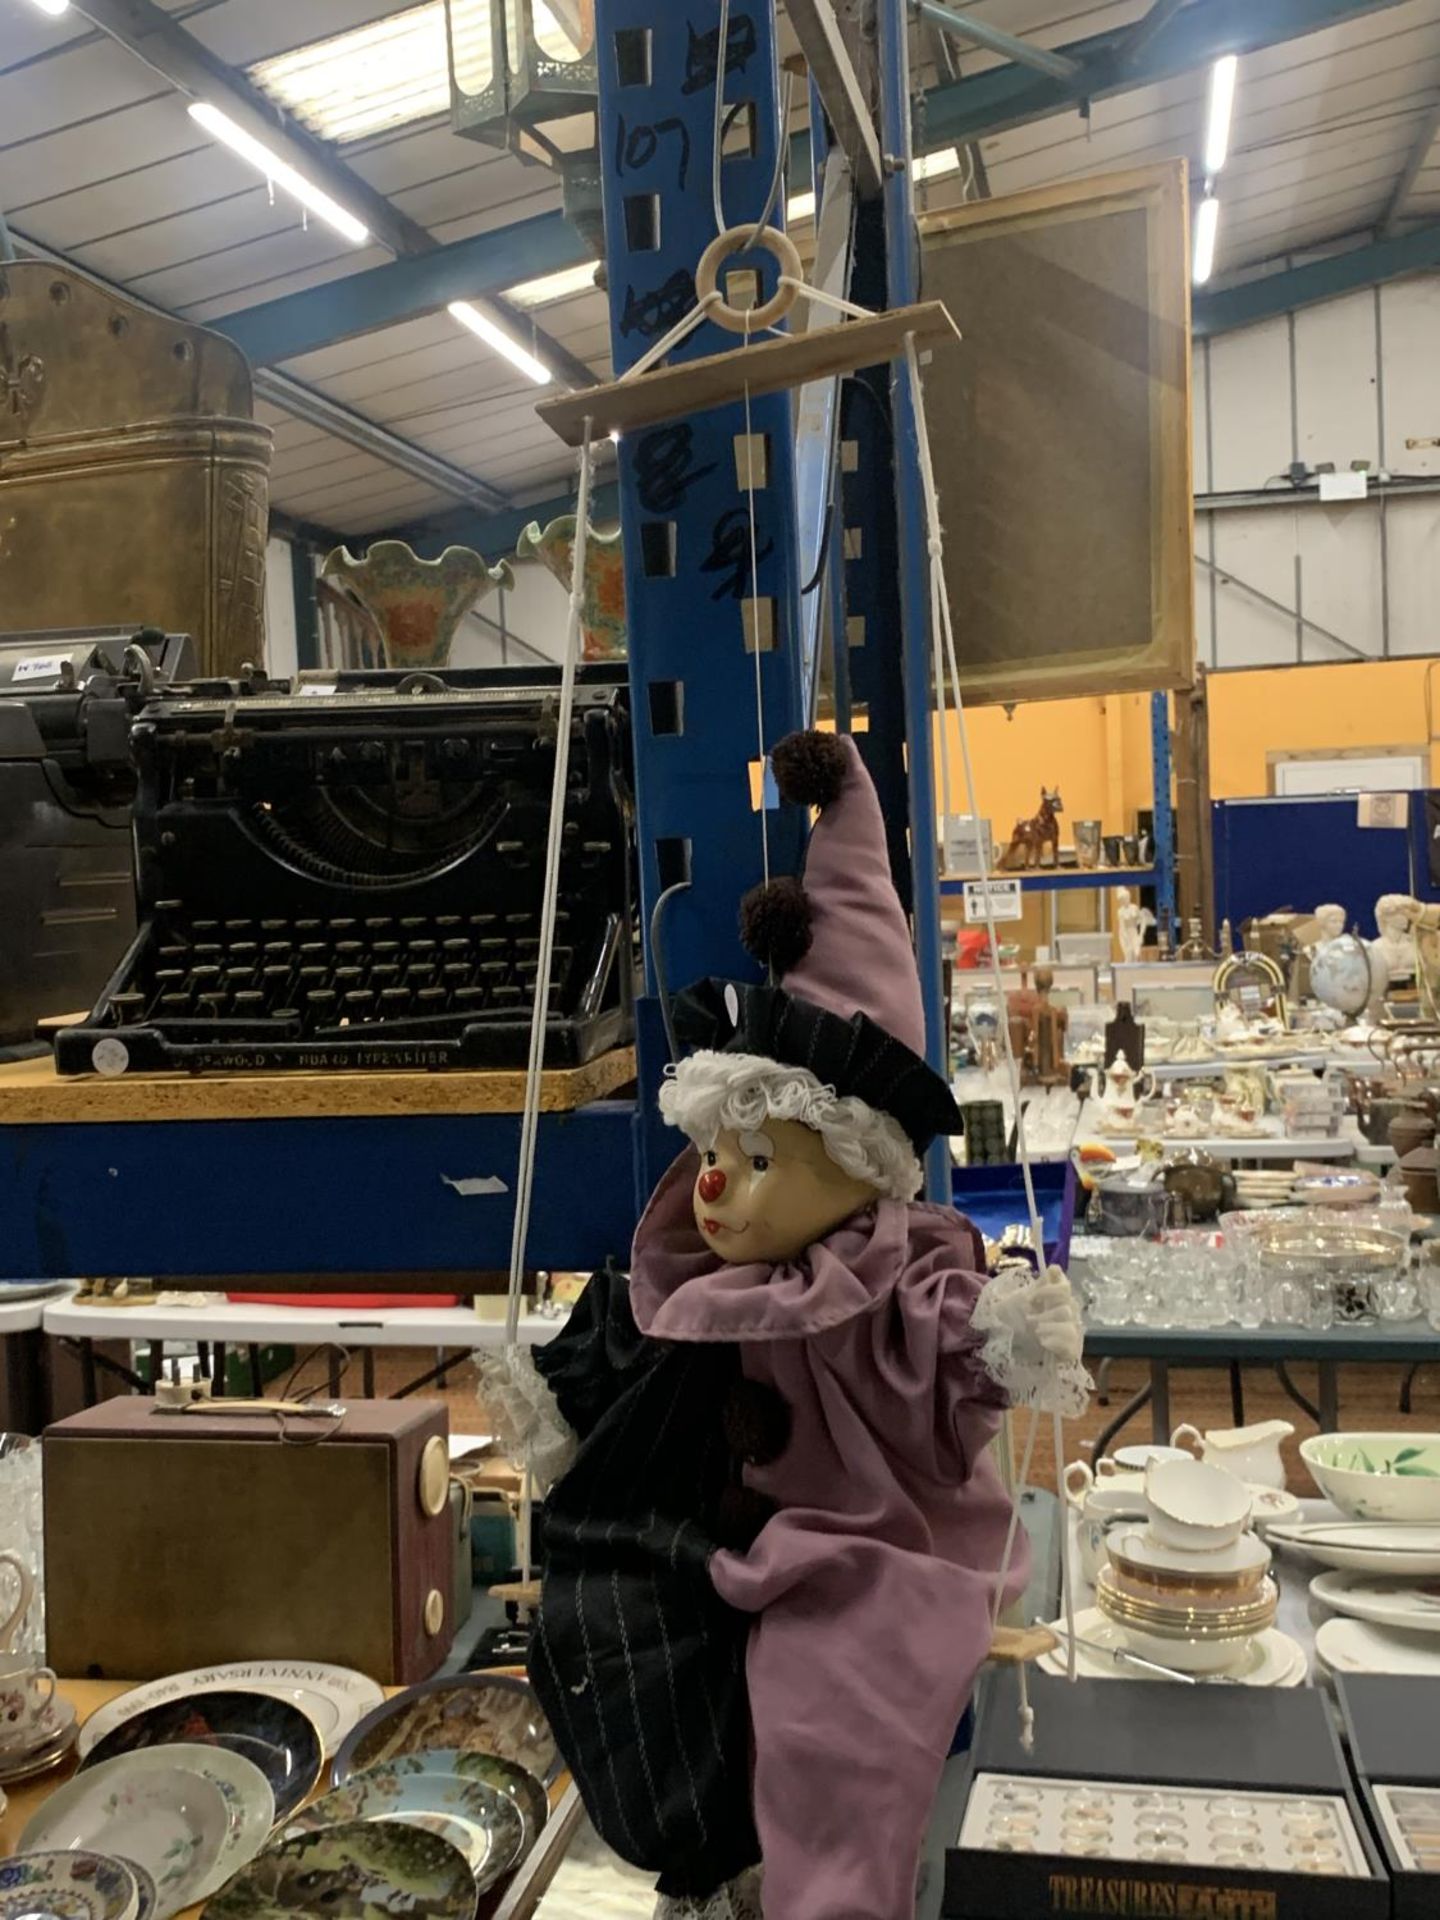 A CLOWN ON A SWING PUPPET - Image 2 of 4